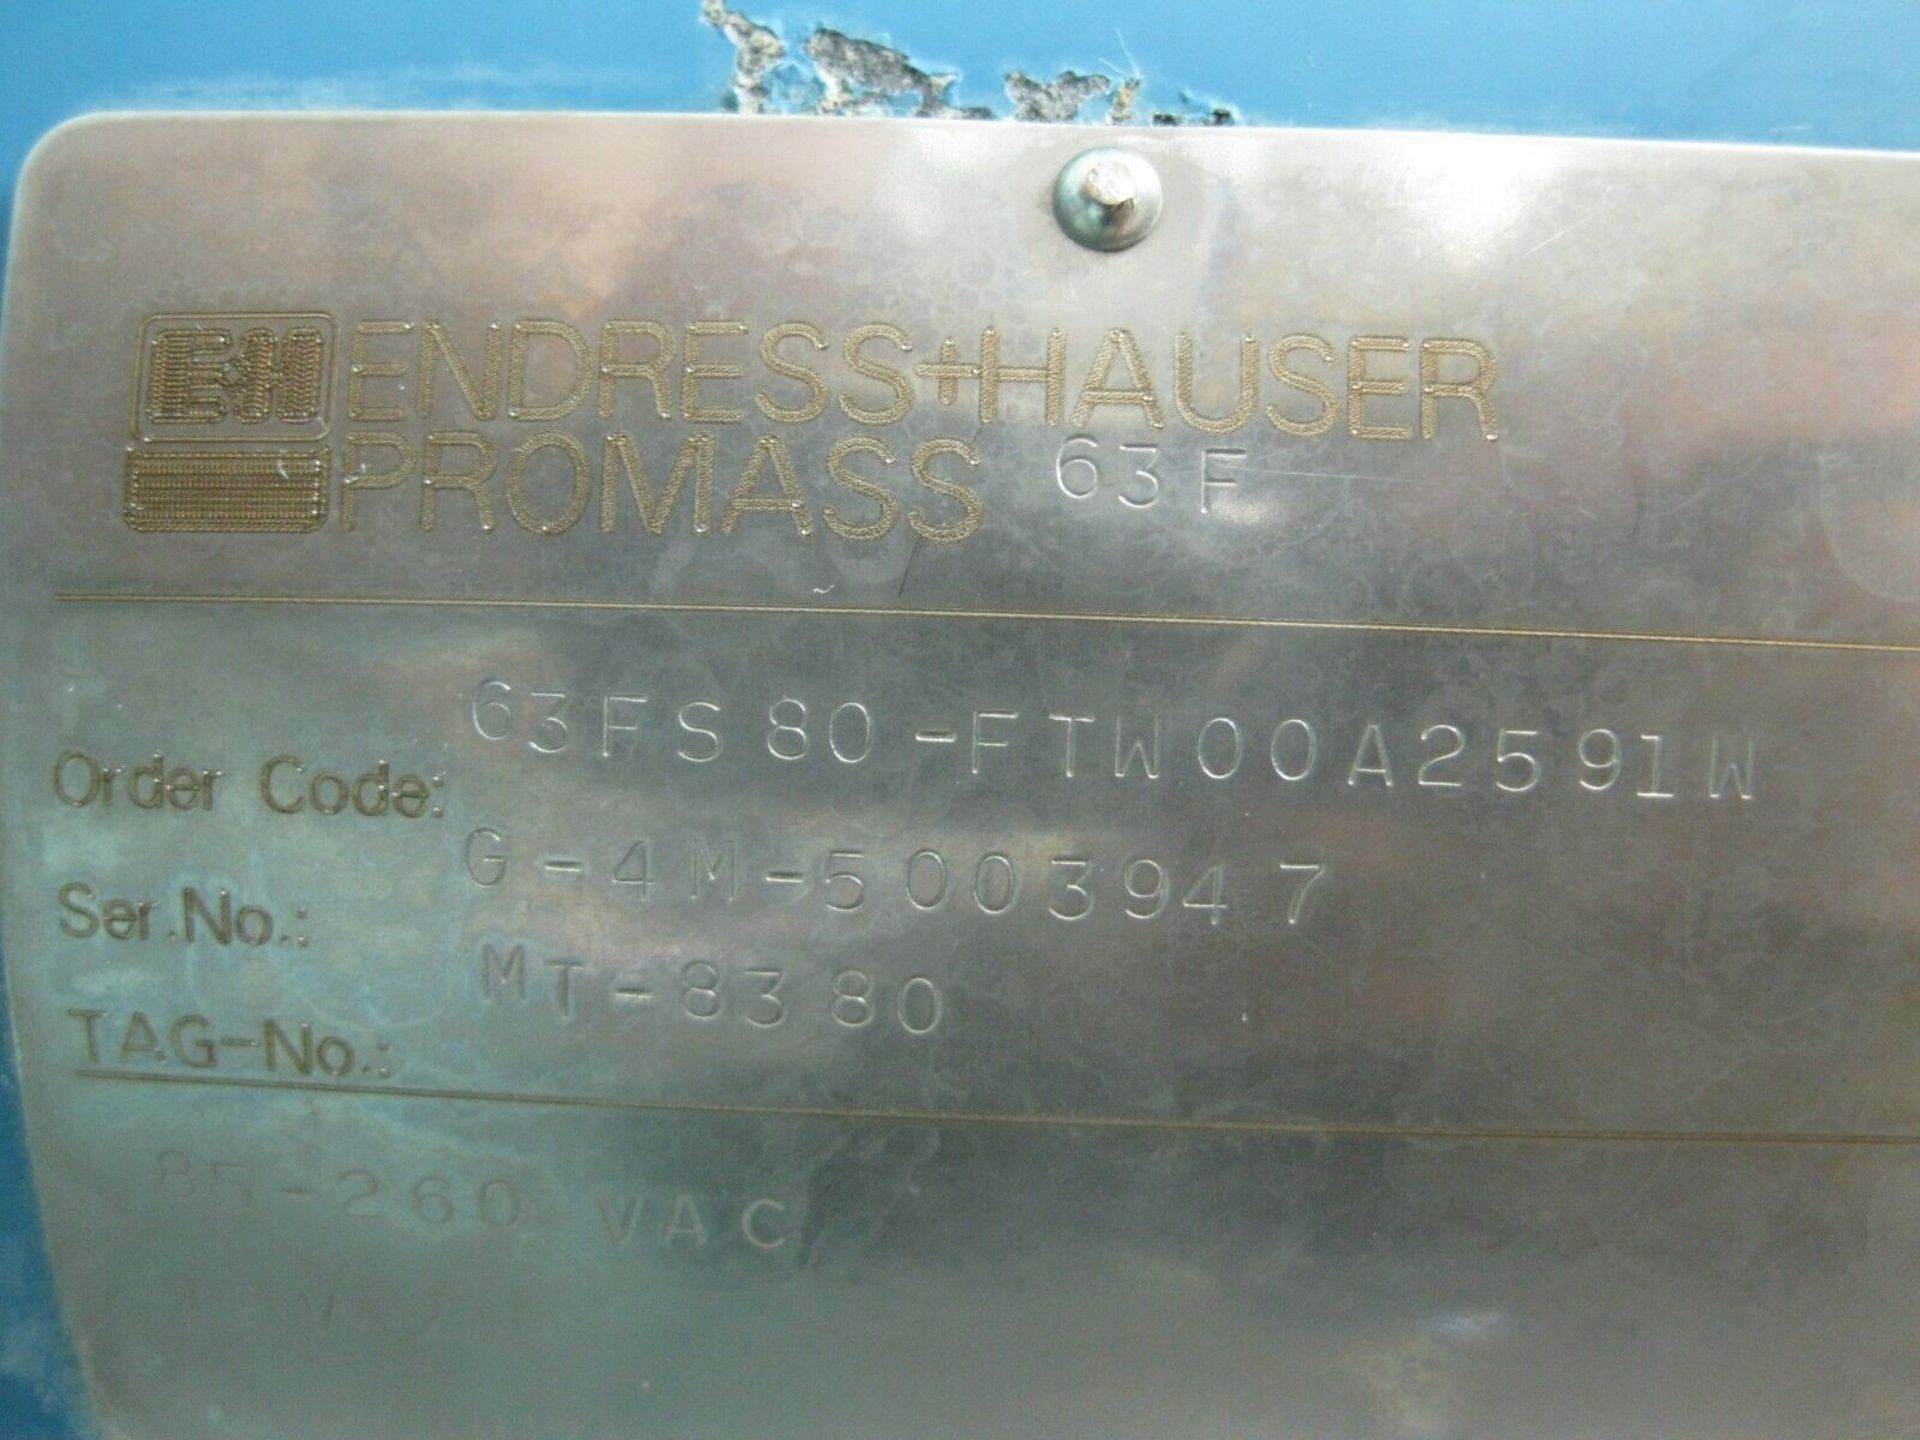 3" Endress Hauser 63FS80-FTW00A2591W Promass 63 F Flowmeter Profibus (Located Springfield, NH) ( - Image 4 of 6